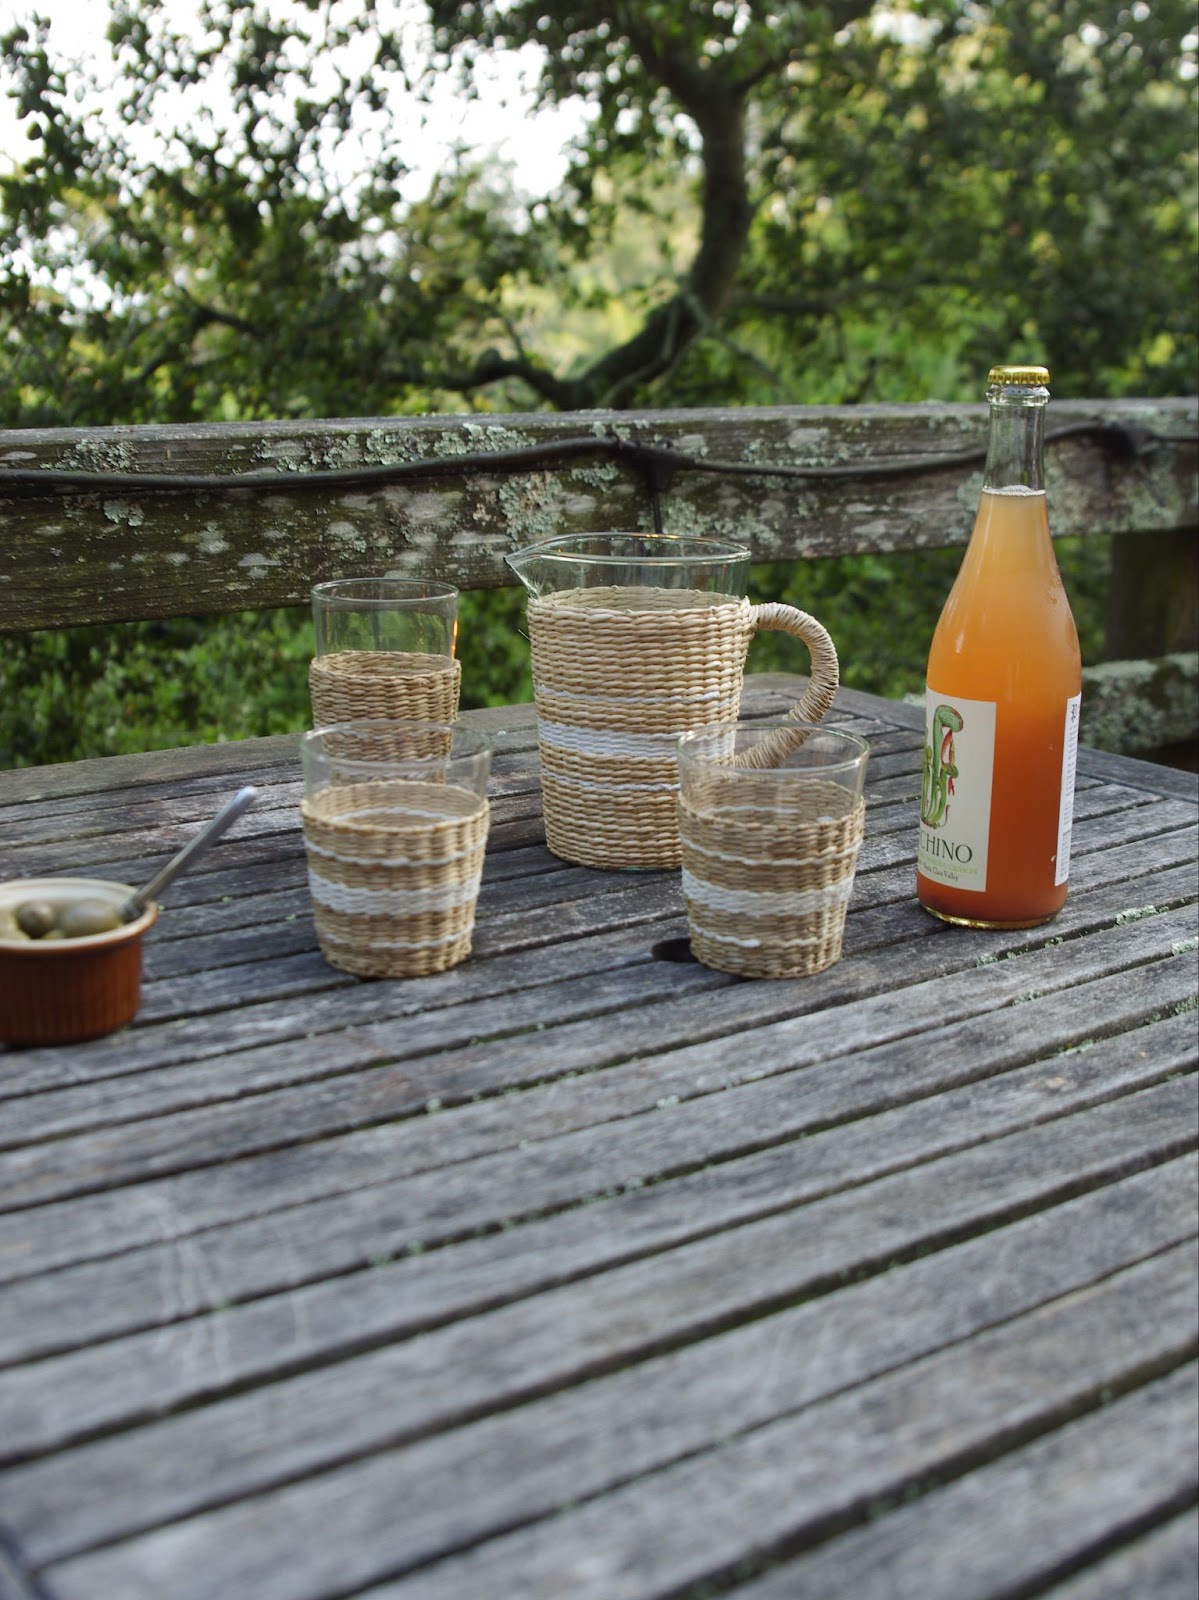 Outdoor table setting of seagrass wrapped glassware and pitcher next to bottle of wine and ramekin full of olives.